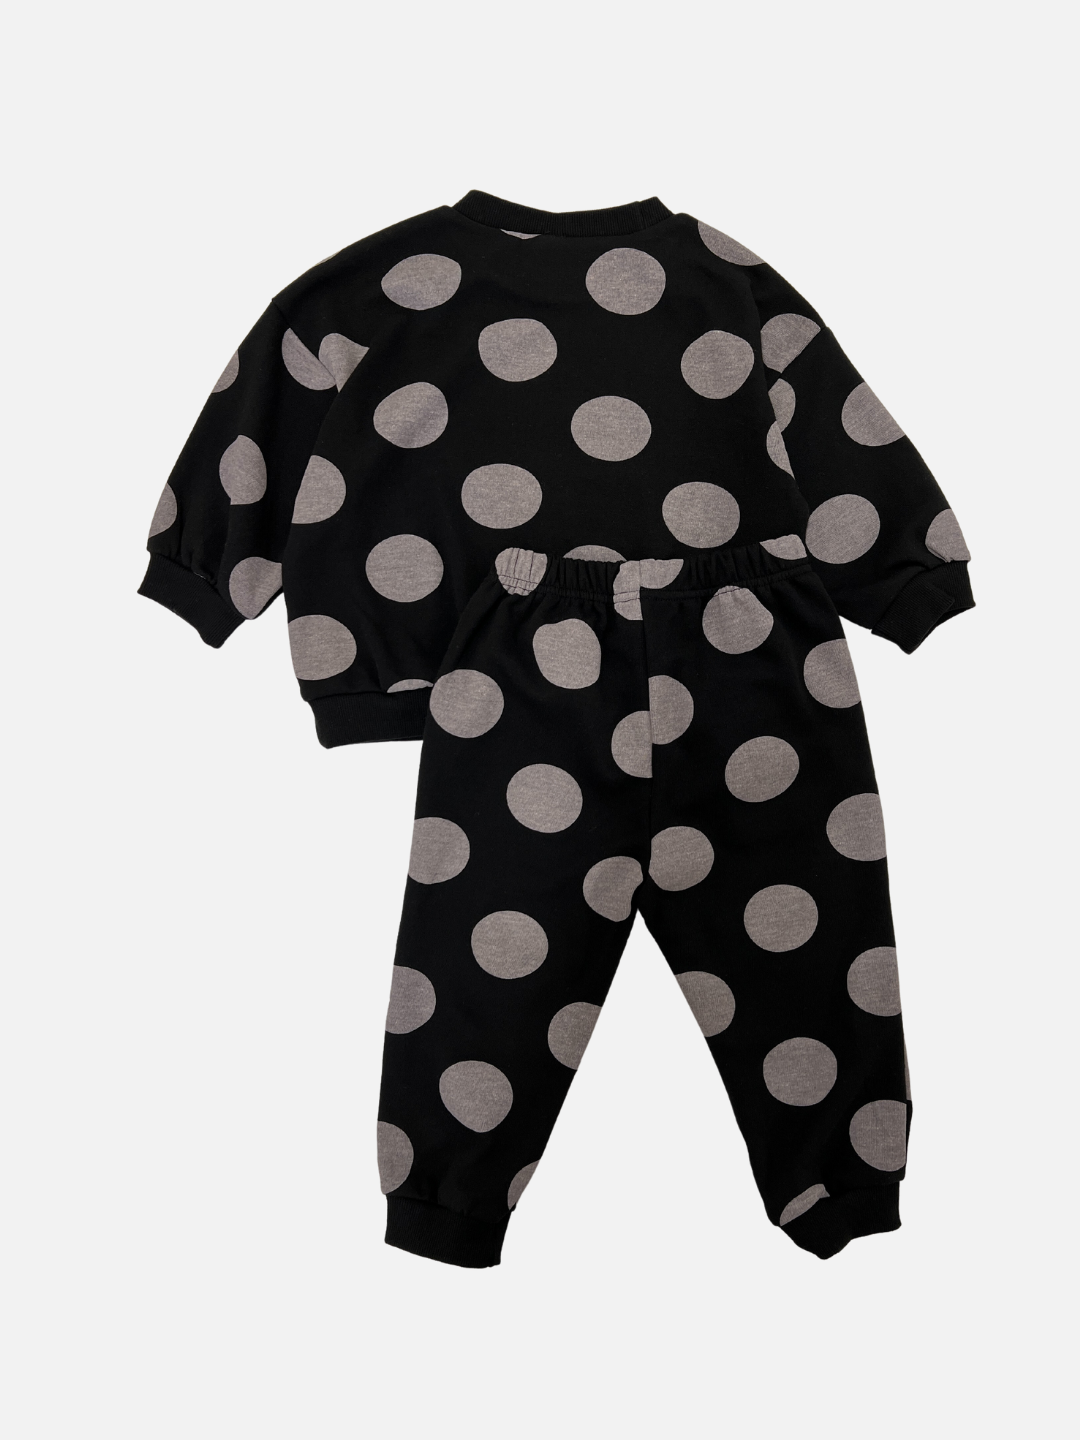 Back view of a kids sweat set in black with large grey polka dots. The set consists of a crewneck sweatshirt and a matching sweatpant.